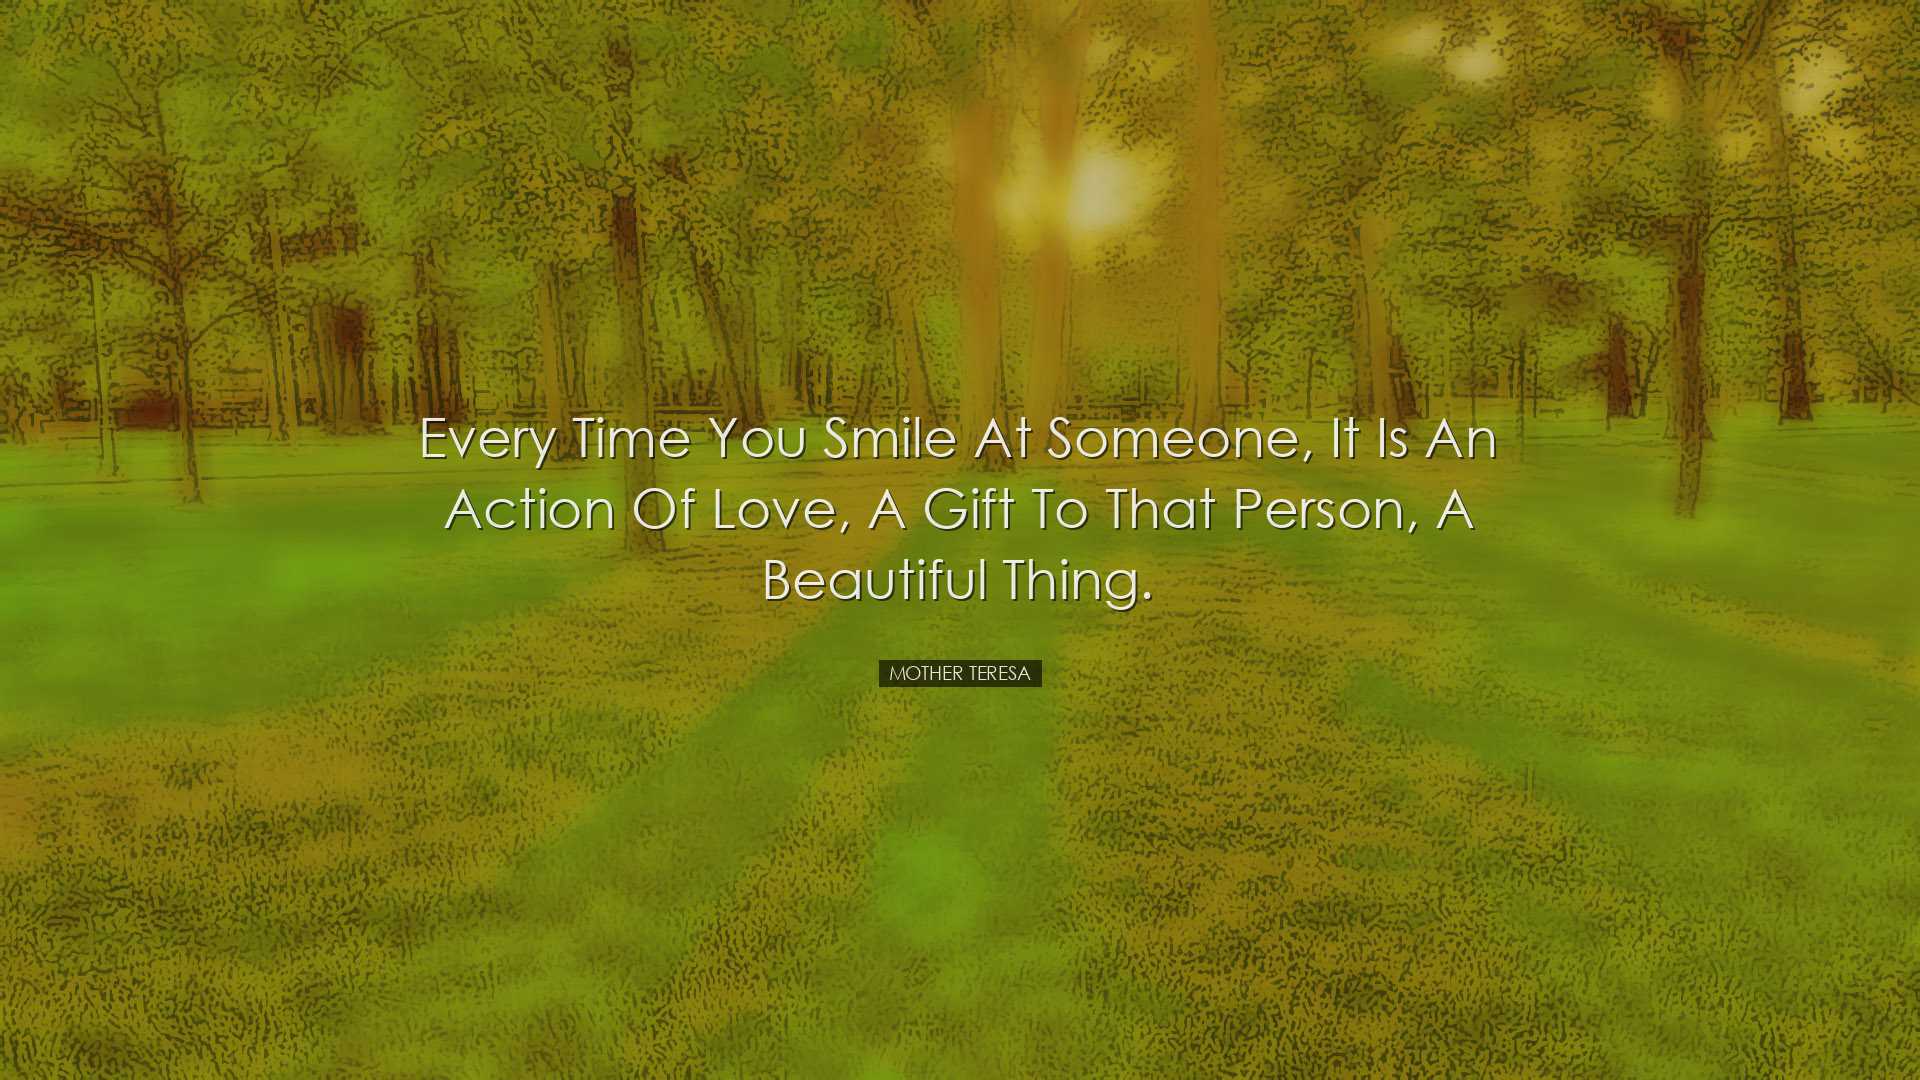 Every time you smile at someone, it is an action of love, a gift t